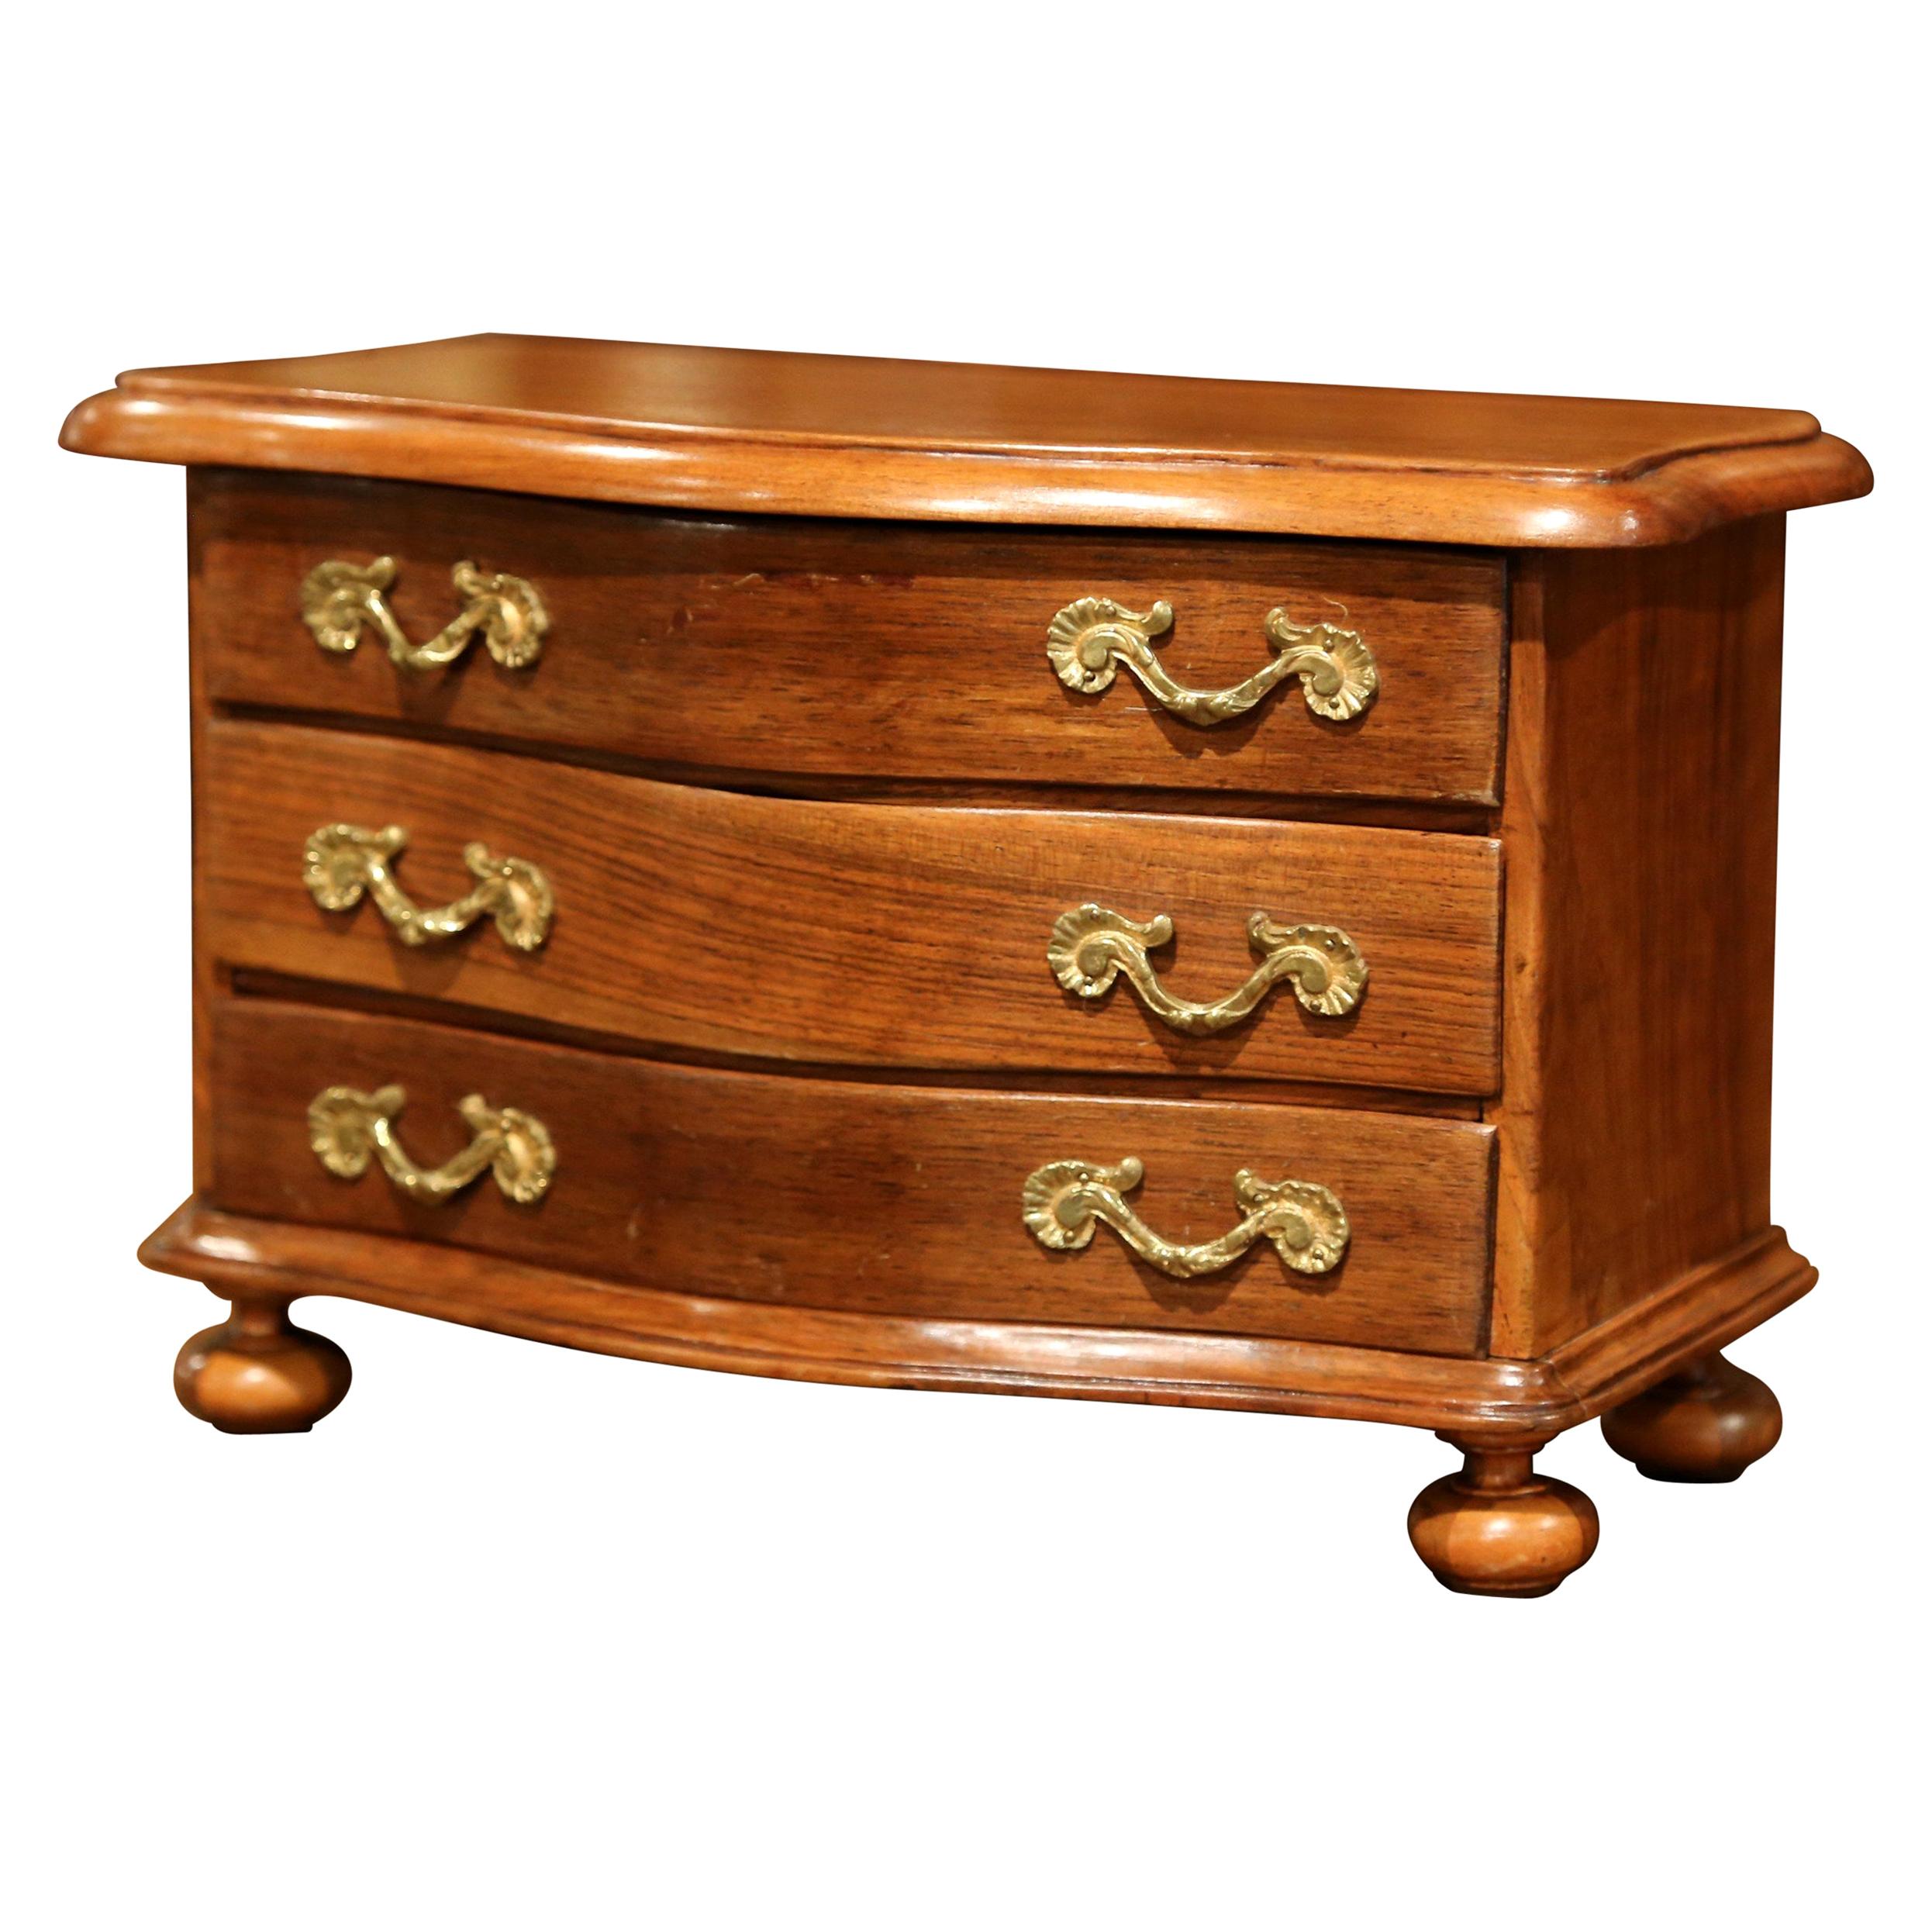 Early 20th Century French Louis XIV Carved Walnut Bombe Miniature Commode Chest For Sale